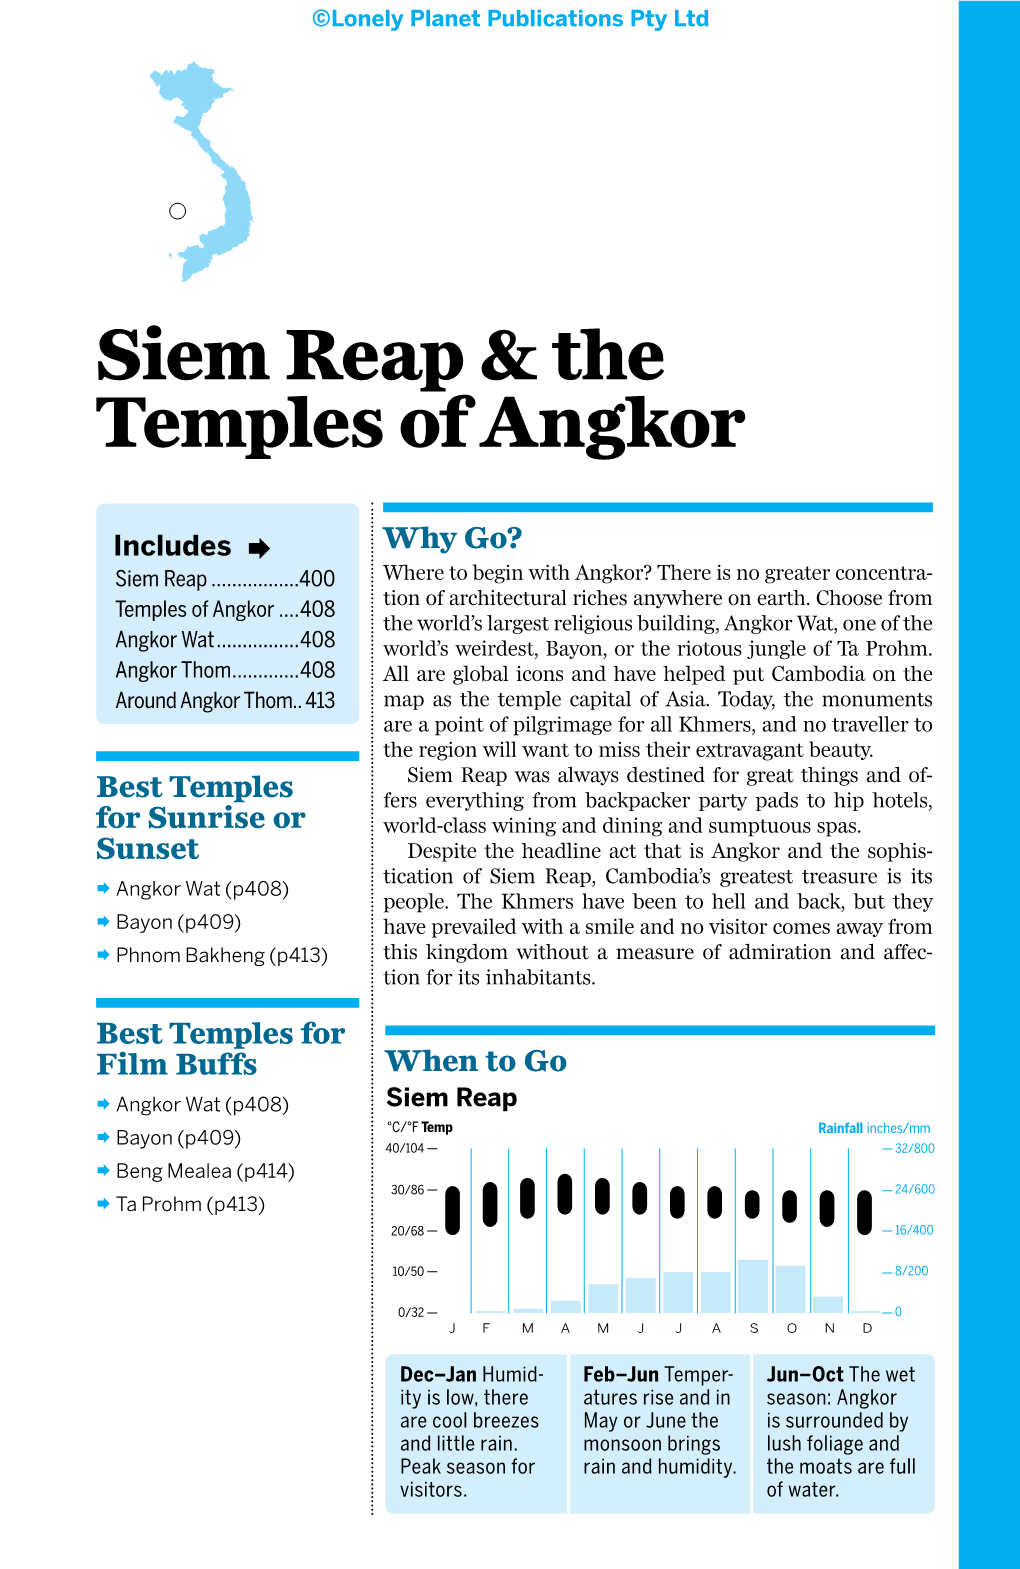 Siem Reap & the Temples of Angkor